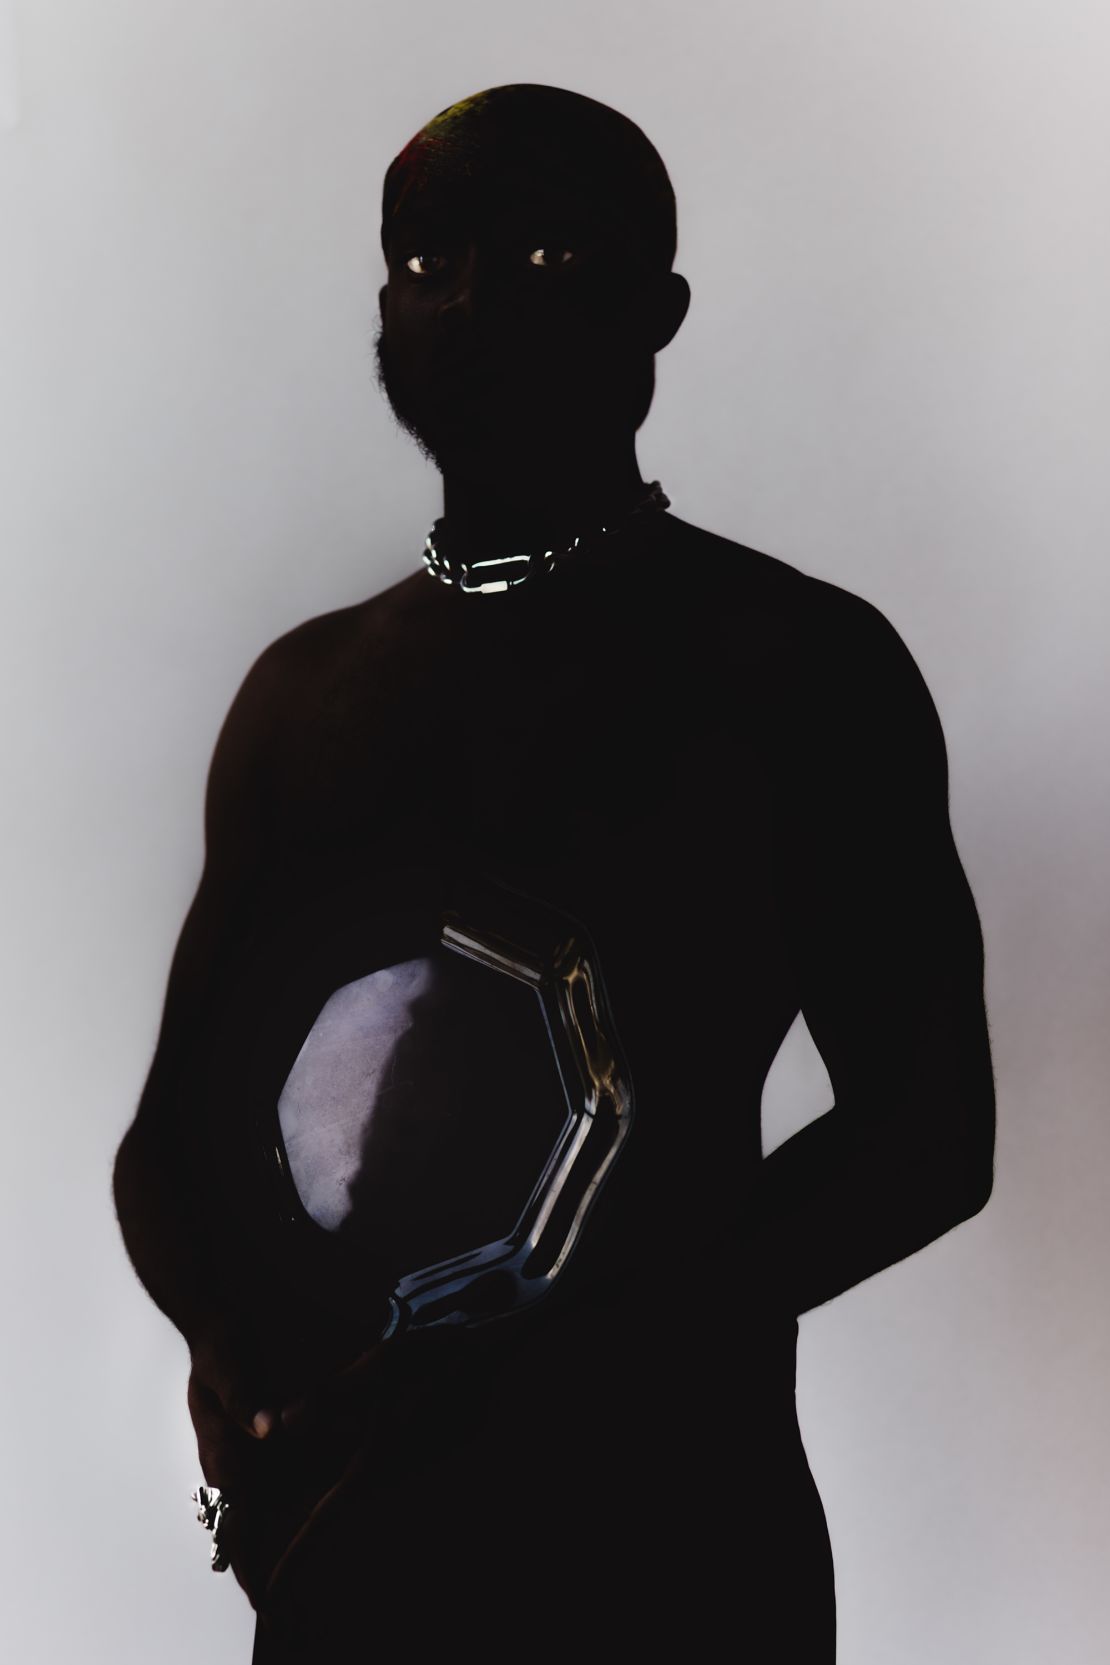 St. Louis-based photographer Justin Solomon experiments with silhouettes in his portraiture.